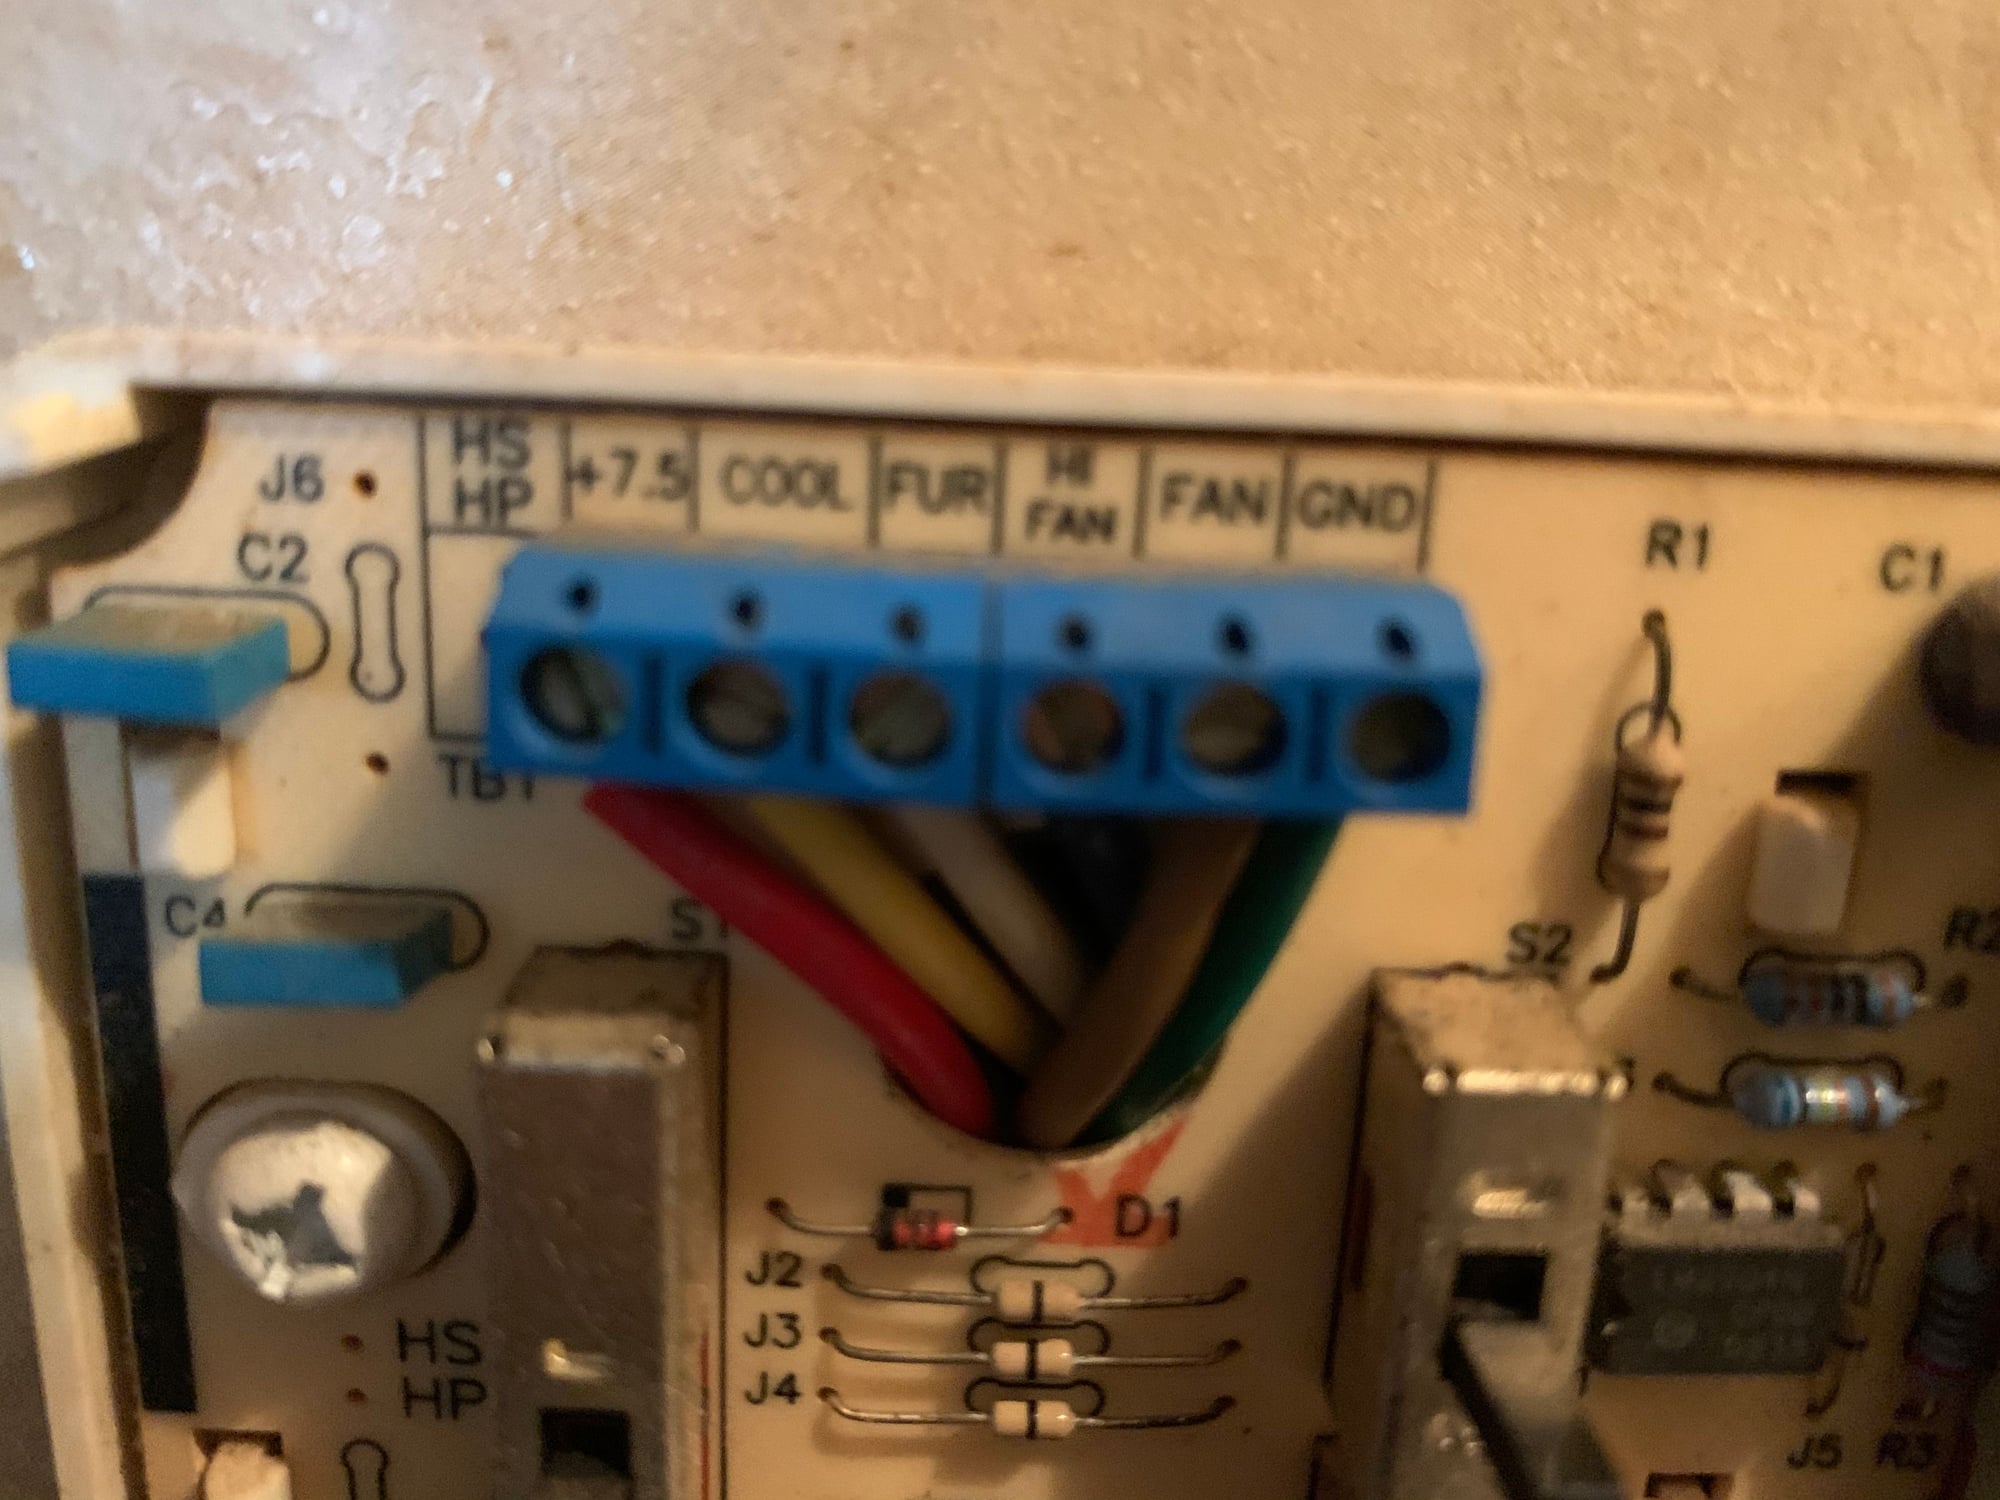 How to wire a/c thermostat - DoItYourself.com Community Forums